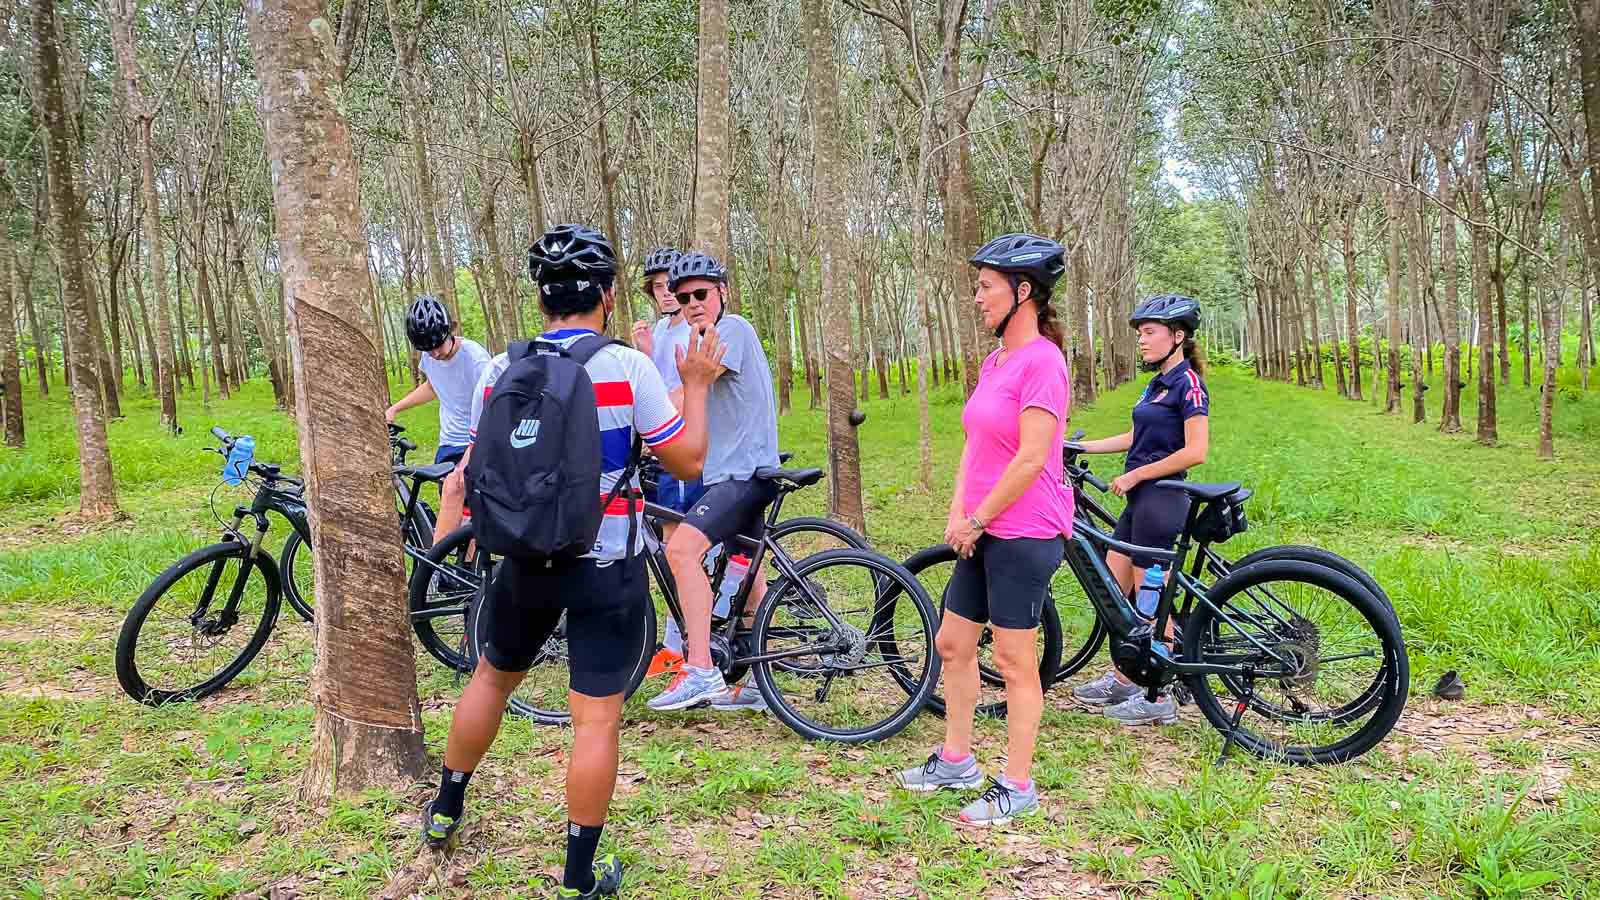 Group of cyclists in rubber tree forest in Thailand bike tour